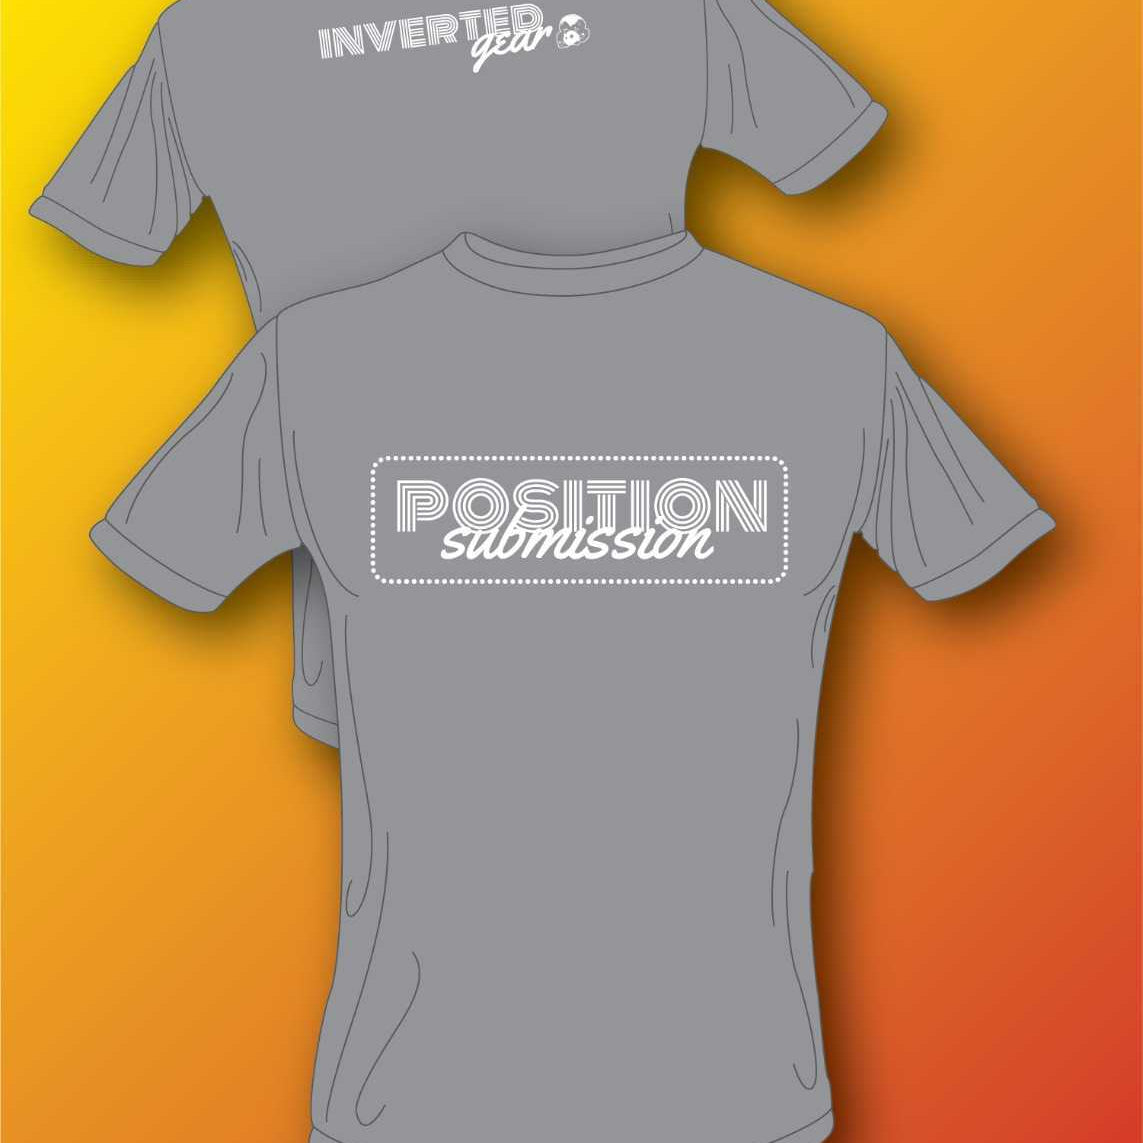 Position/Submission T-shirt